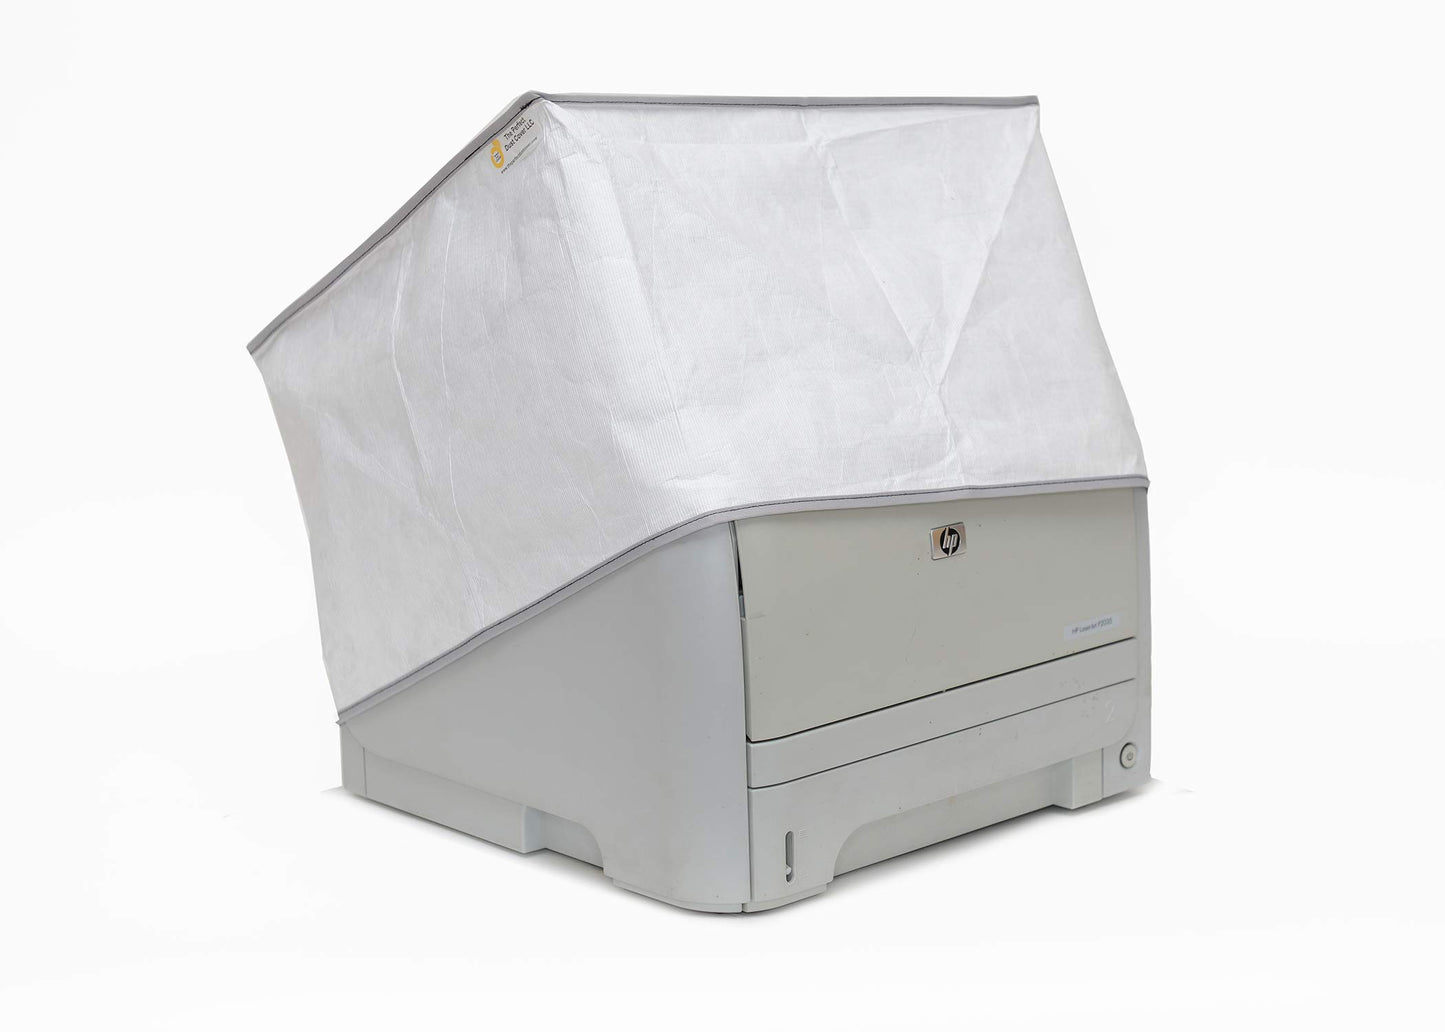 The Perfect Dust Cover, White Vinyl Cover for HP OfficeJet Pro 9025 All-in-One Wireless Printer, Anti Static and Waterproof Cover Dimensions 17.28''W x 15.6''D x 12.5''H by The Perfect Dust Cover LLC